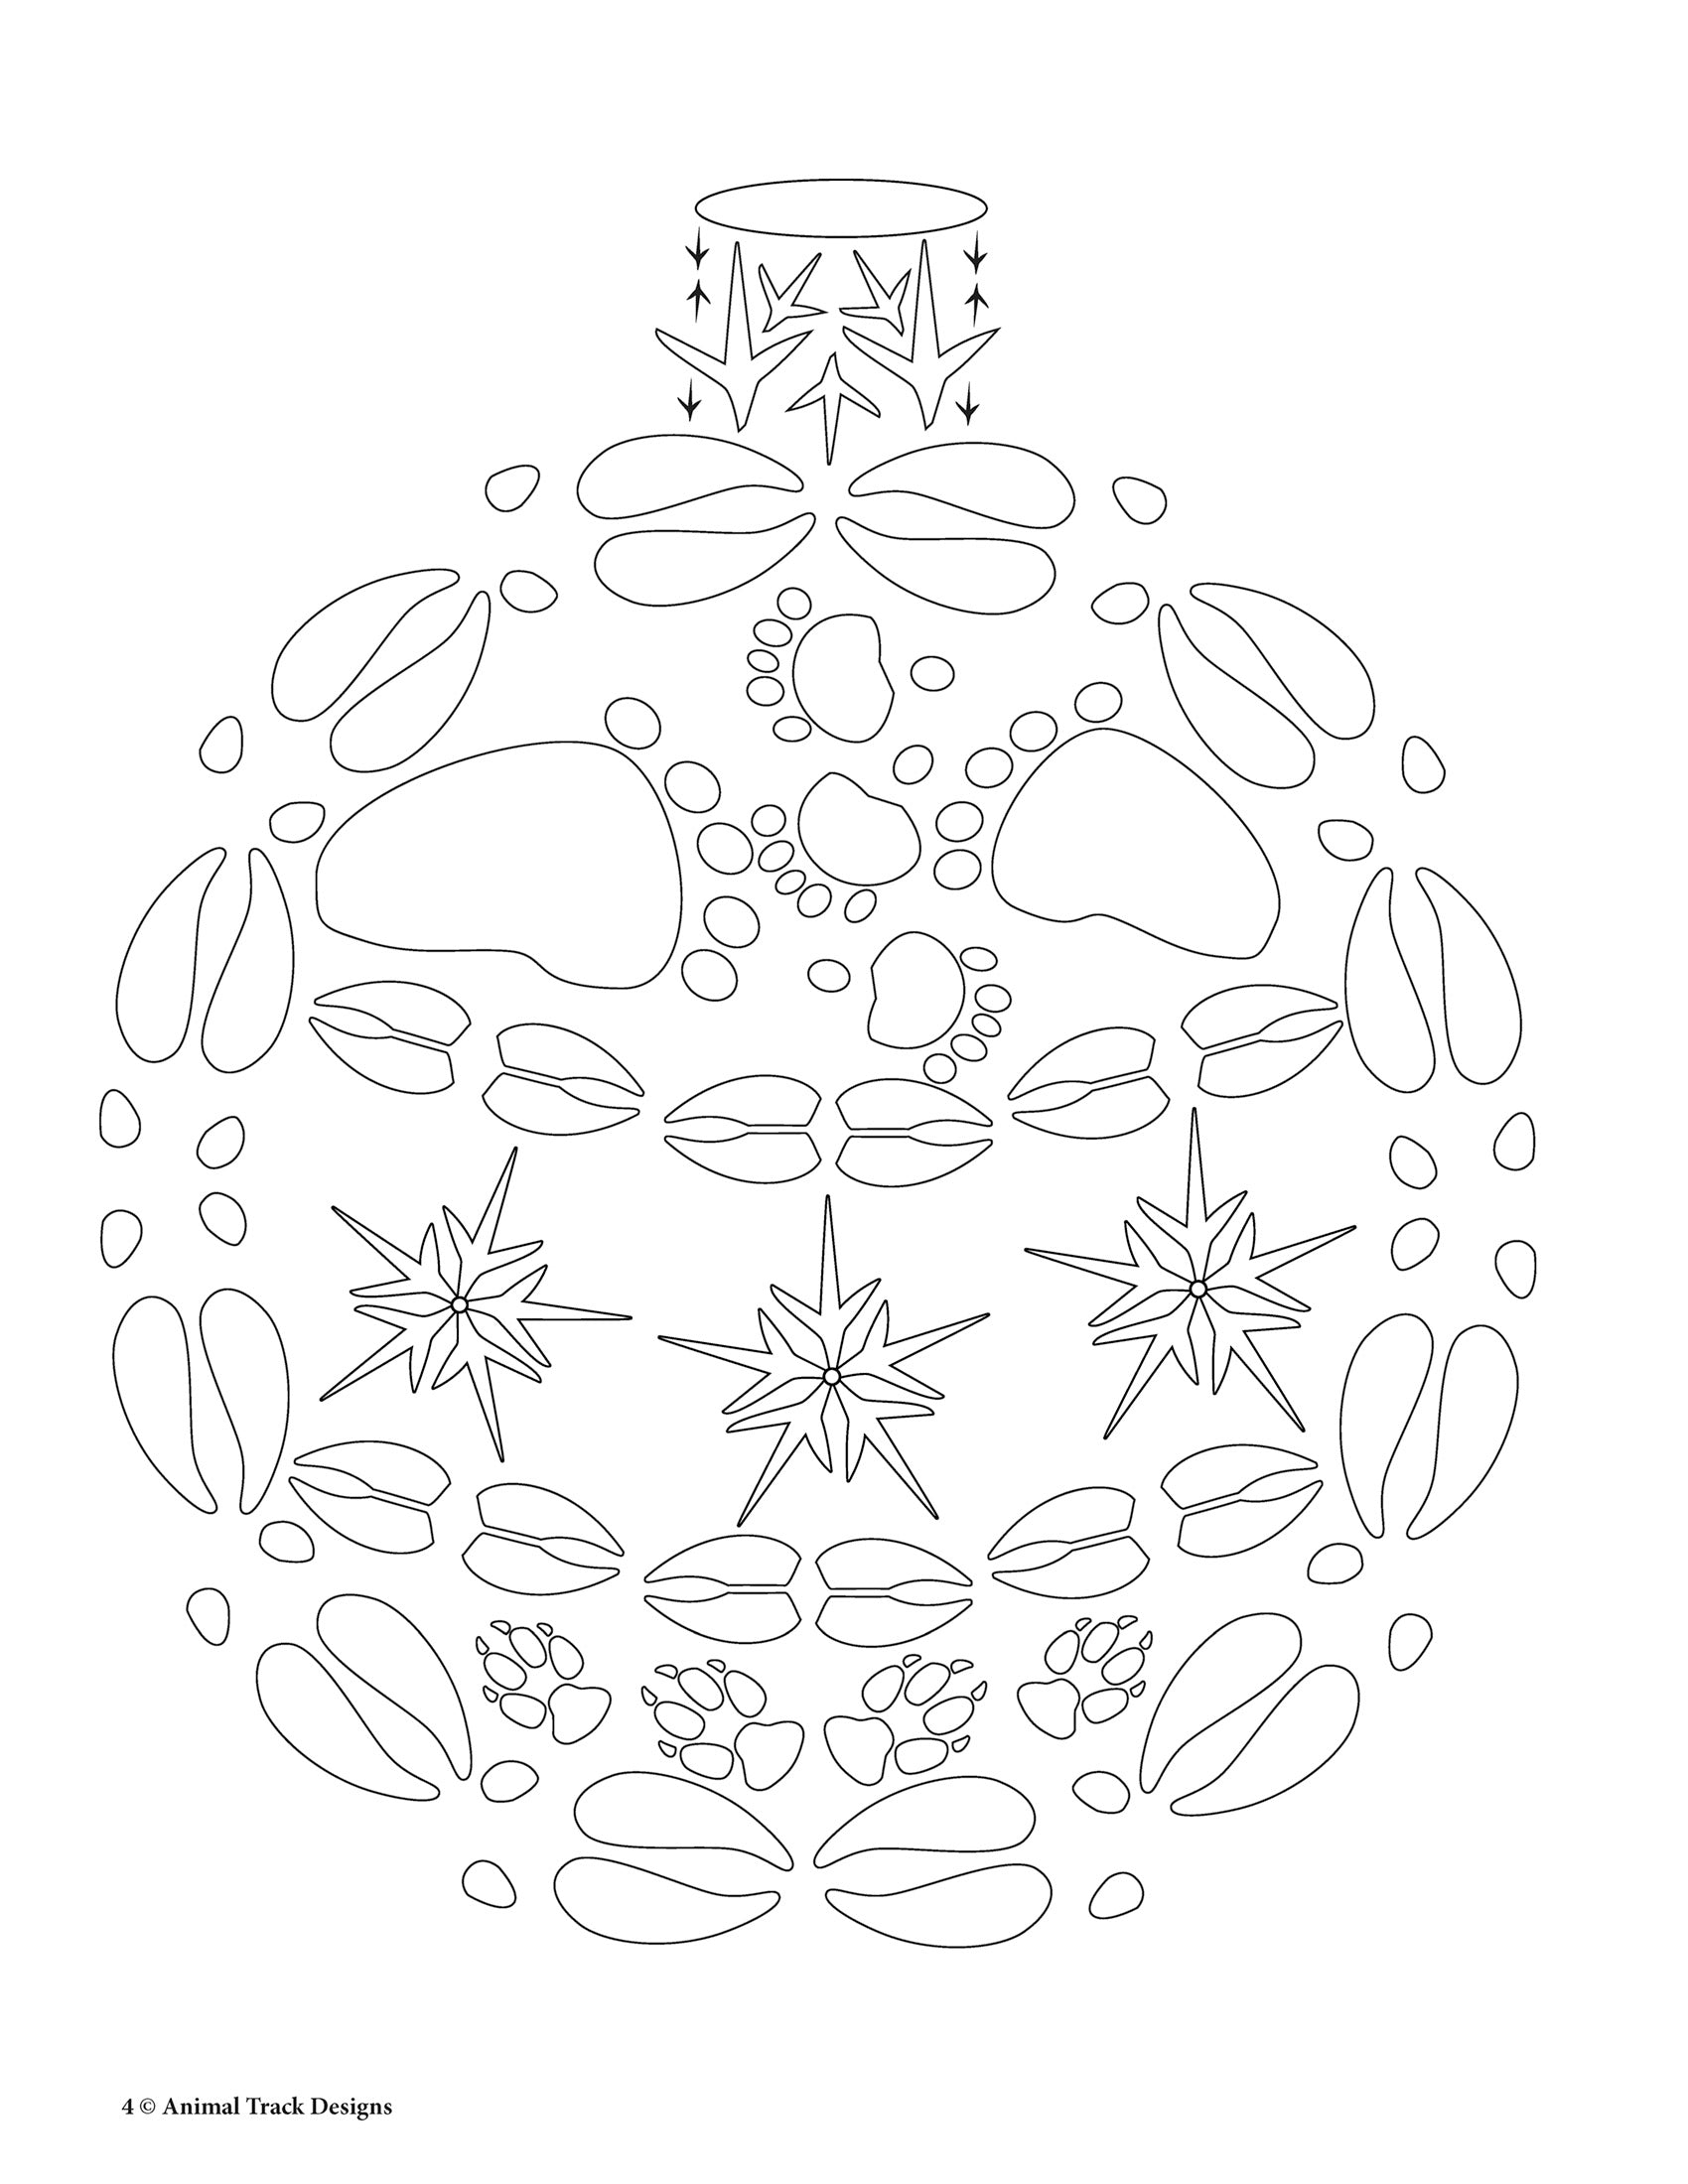 Christmas Coloring Book - Animal Track Designs Animal Track Designs